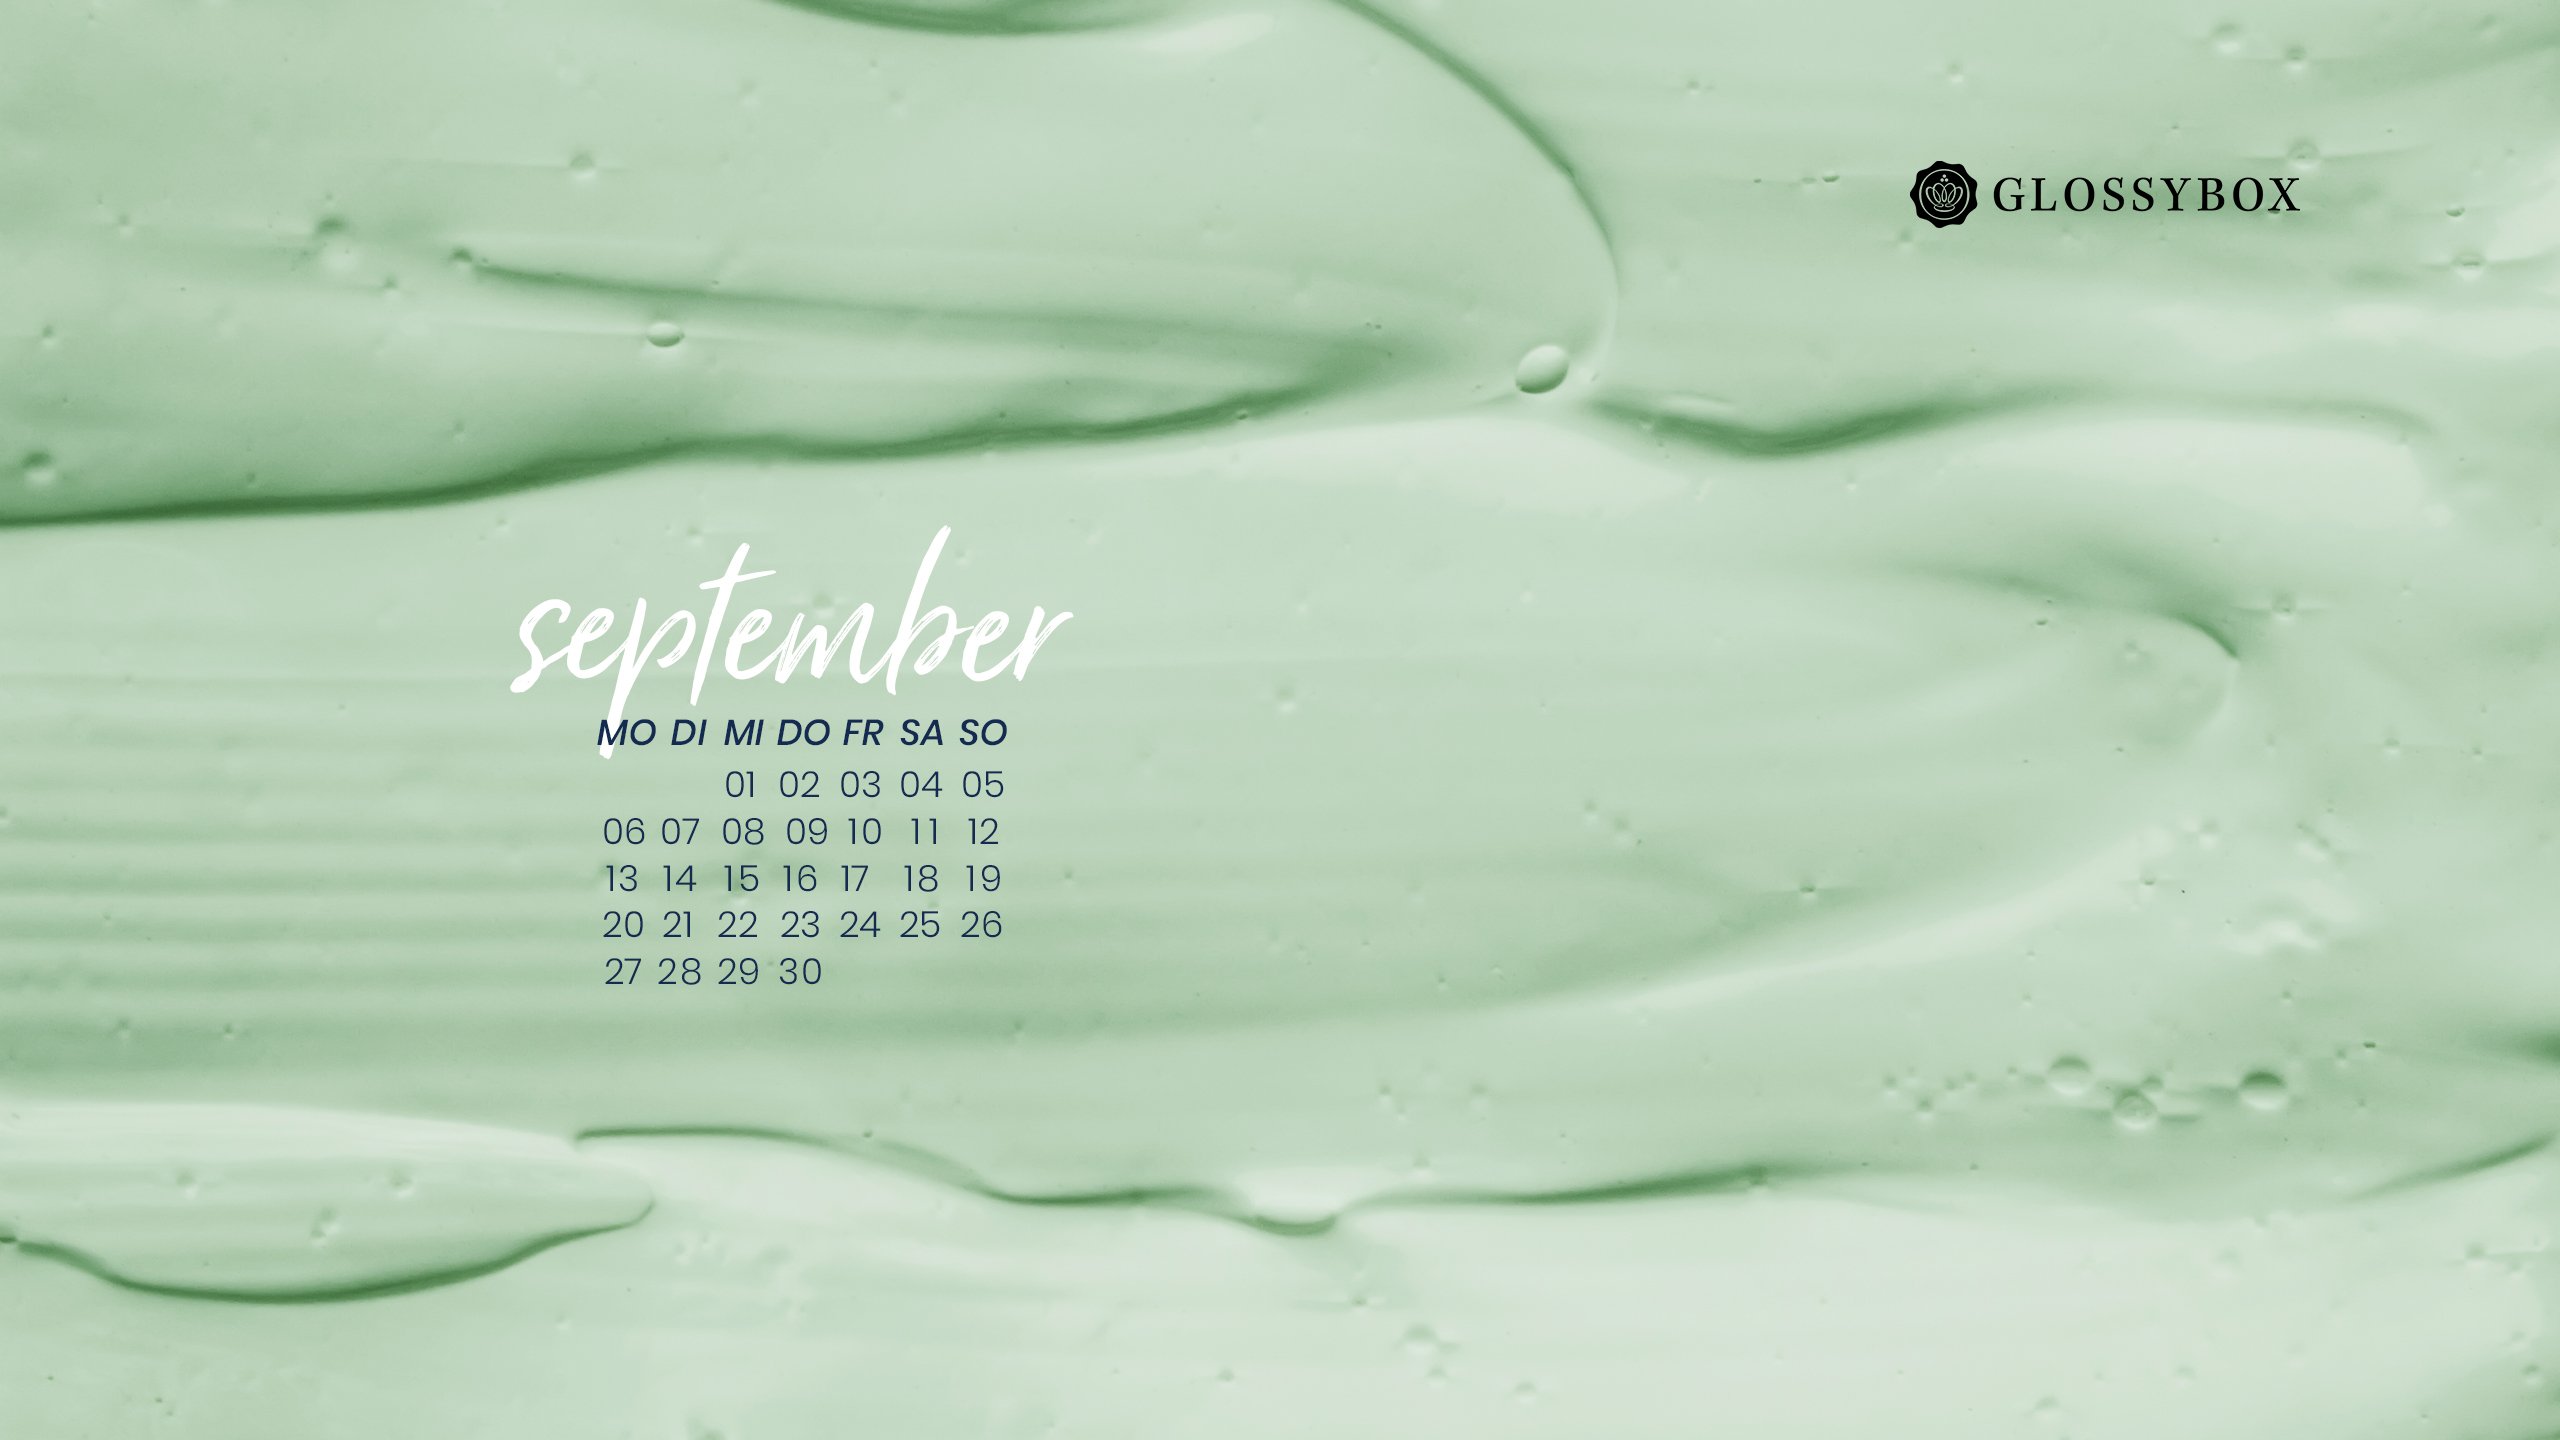 glossybox-wallpaper-september-2021-pure-relaxation-edition-screensaver